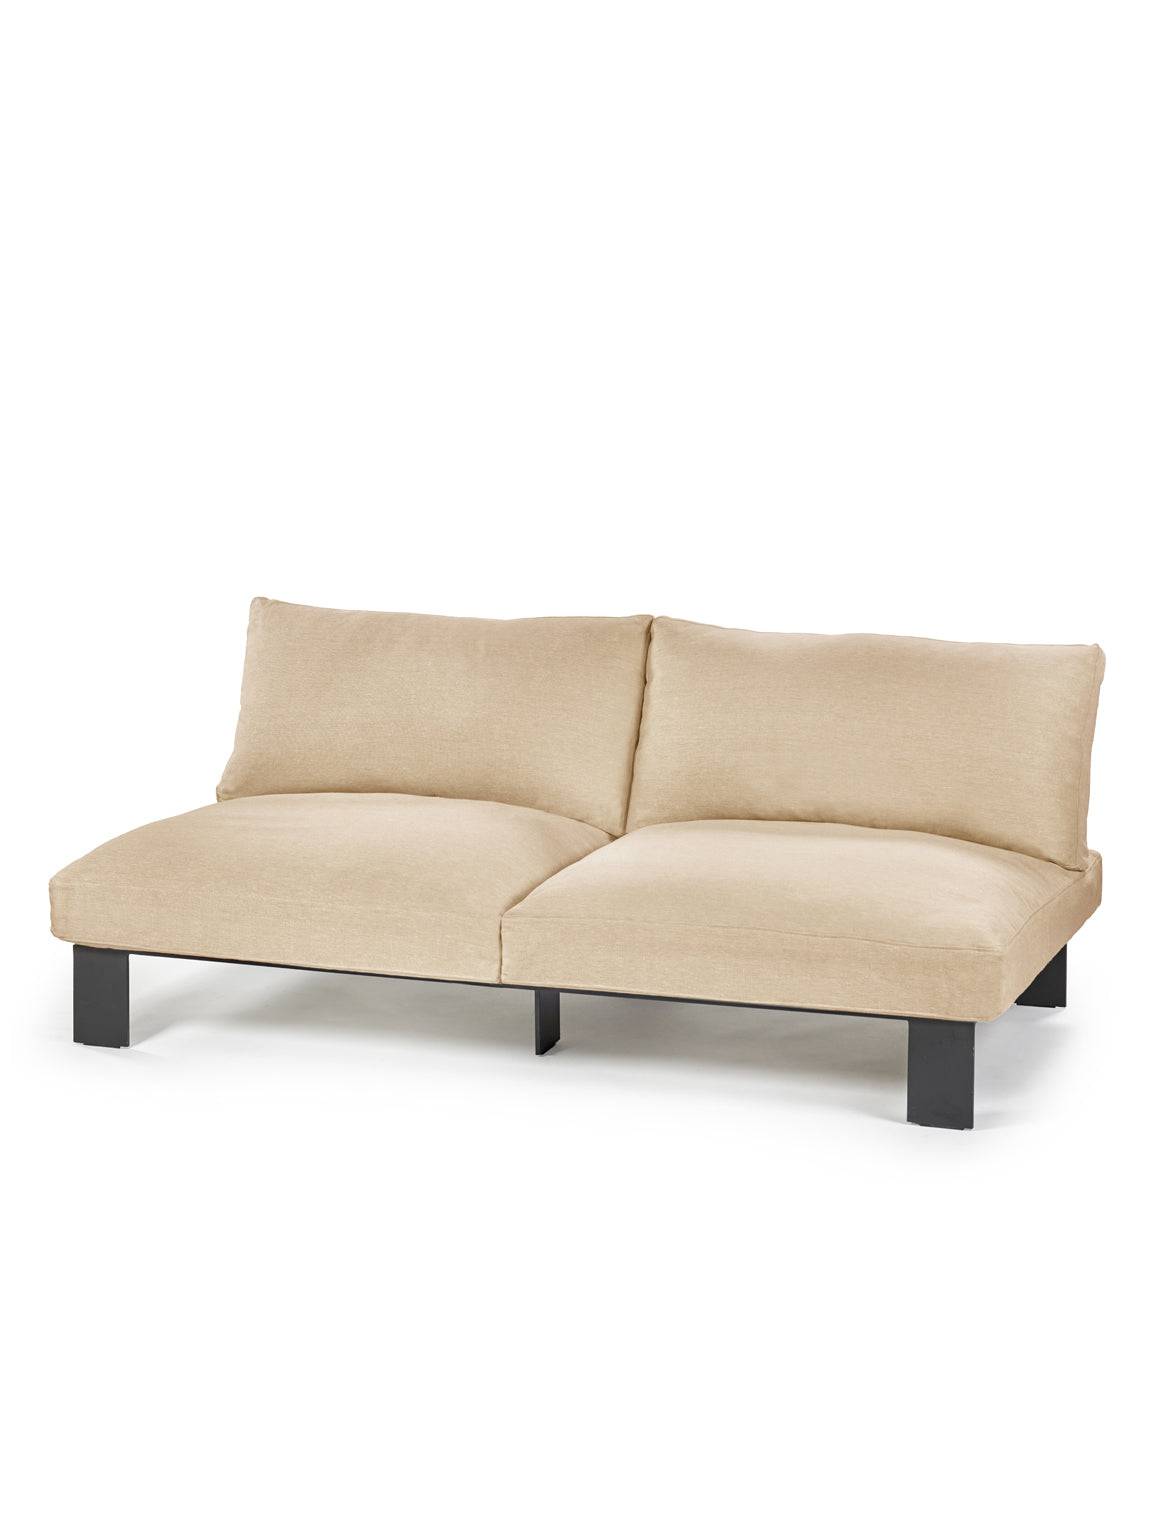 Mombaers Sofa - Apricot - THAT COOL LIVING